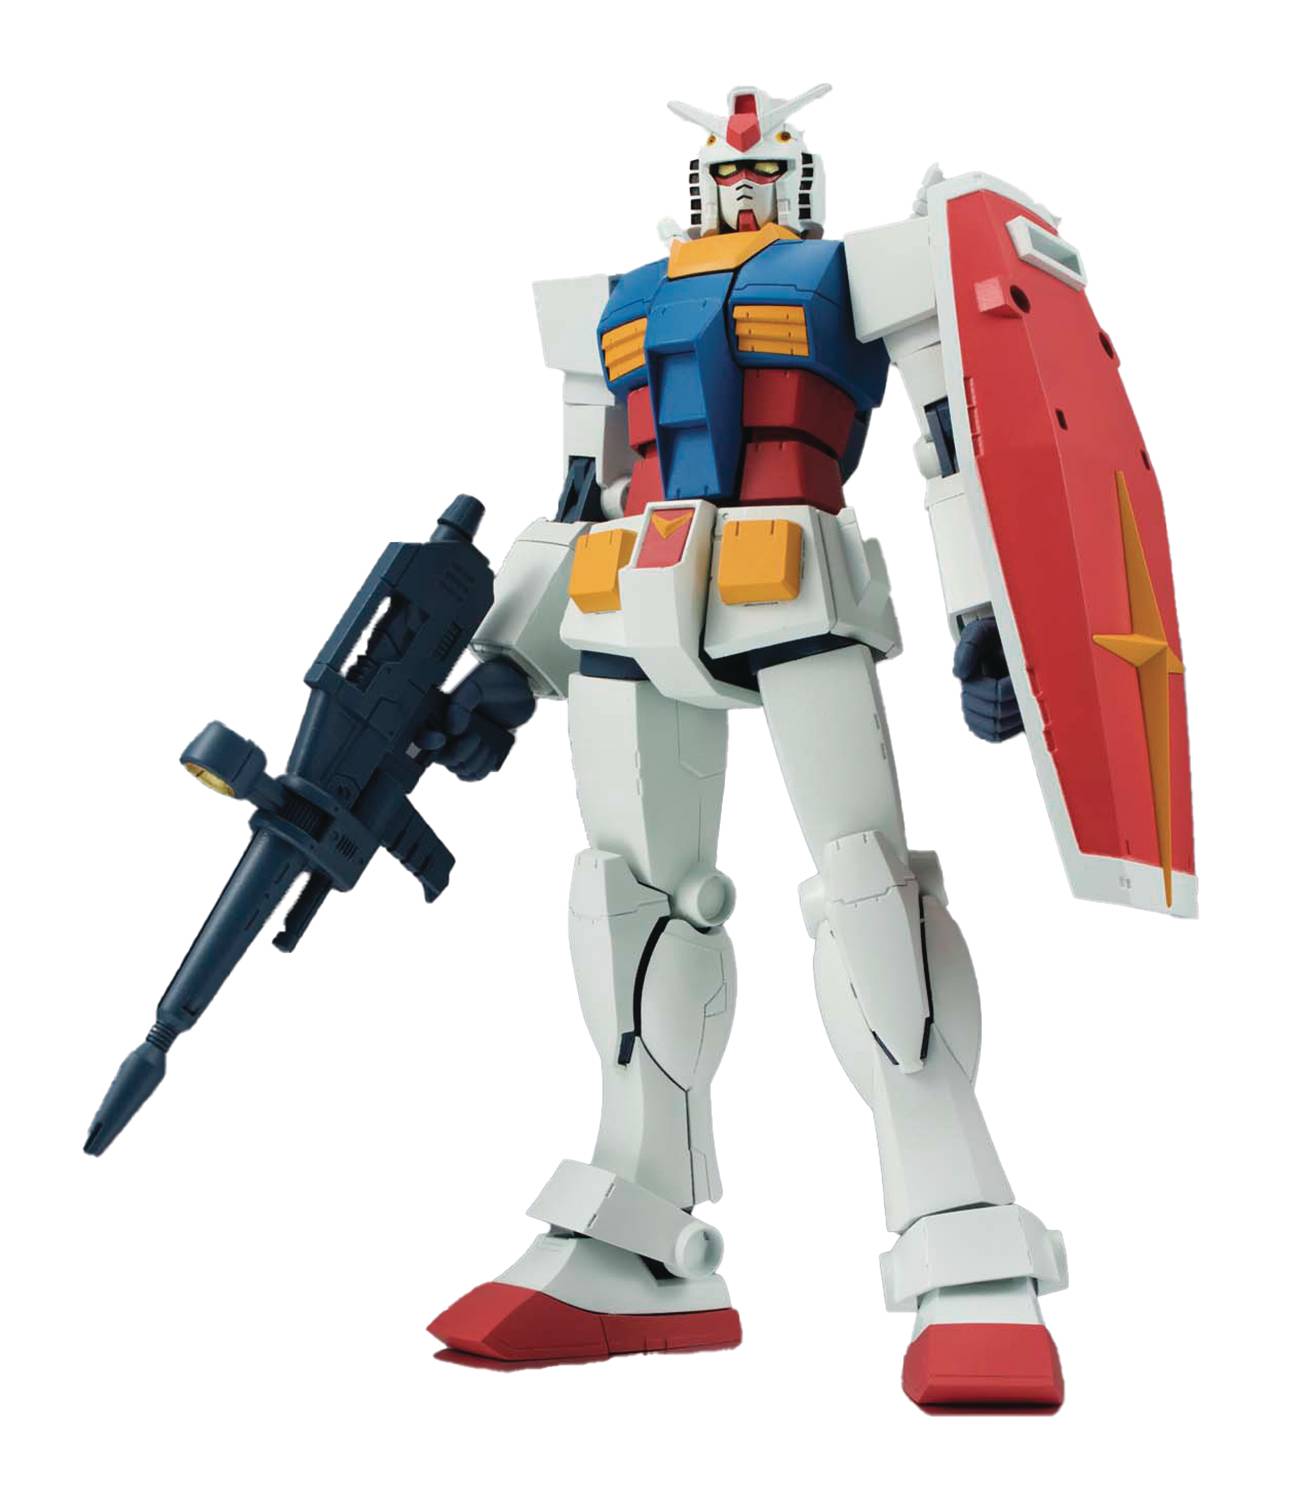 ICv2: Classic 'Gundam' Anime Rolling Out